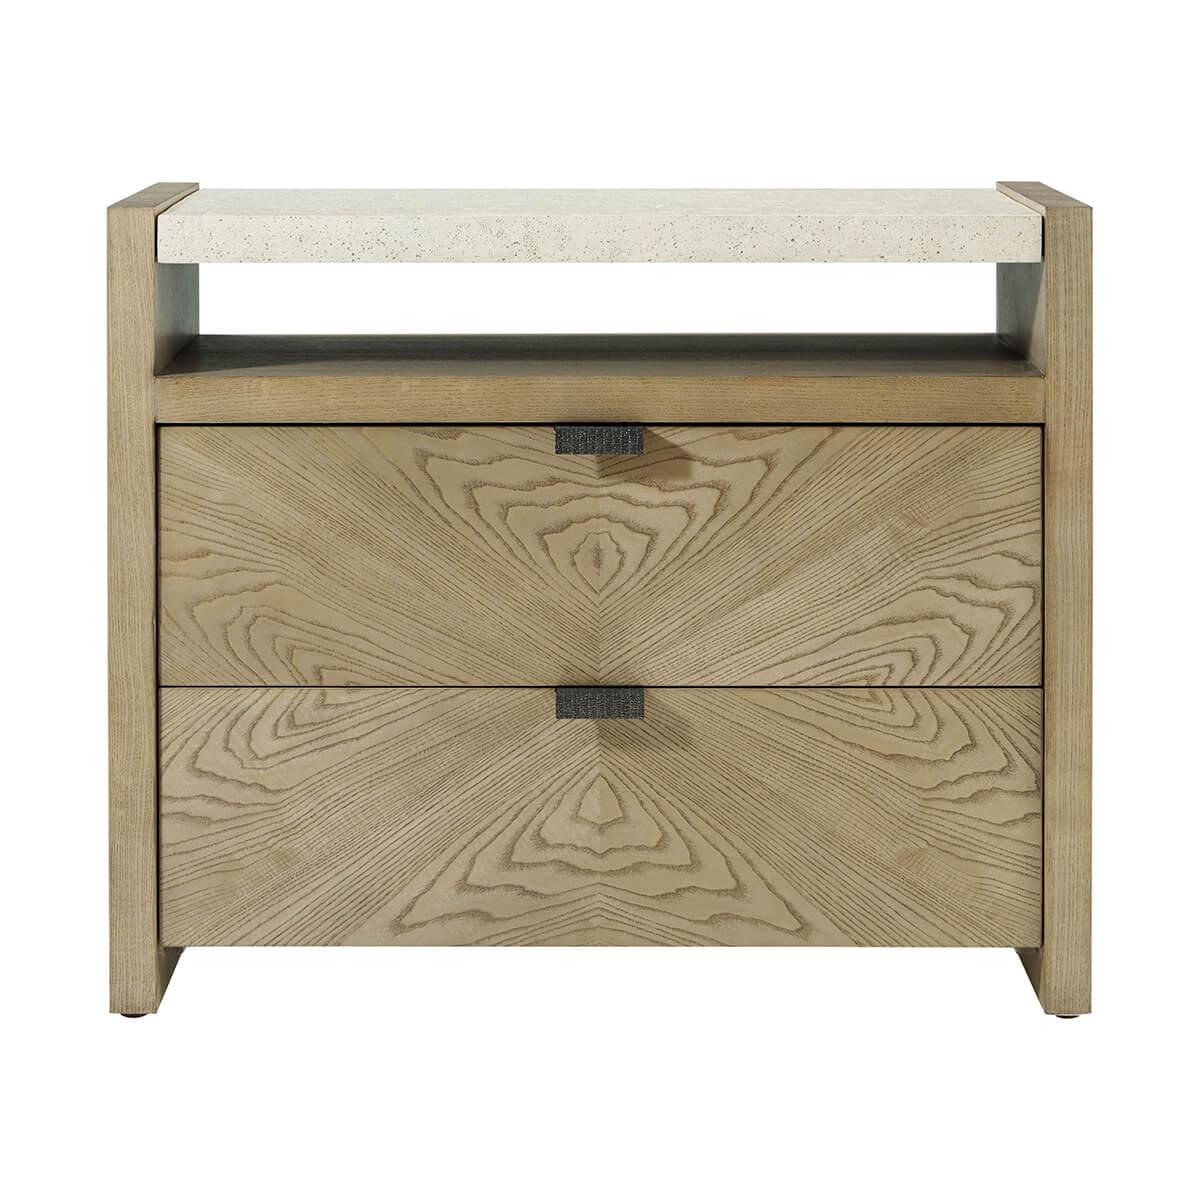 a handsome bedside nightstand in figured cathedral ash in a light dune finish with metal pulls in our Ember finish and soft close drawers.

The top of this nightstand is done in our exclusive Mineral finish. It is perfect for storing your bedroom